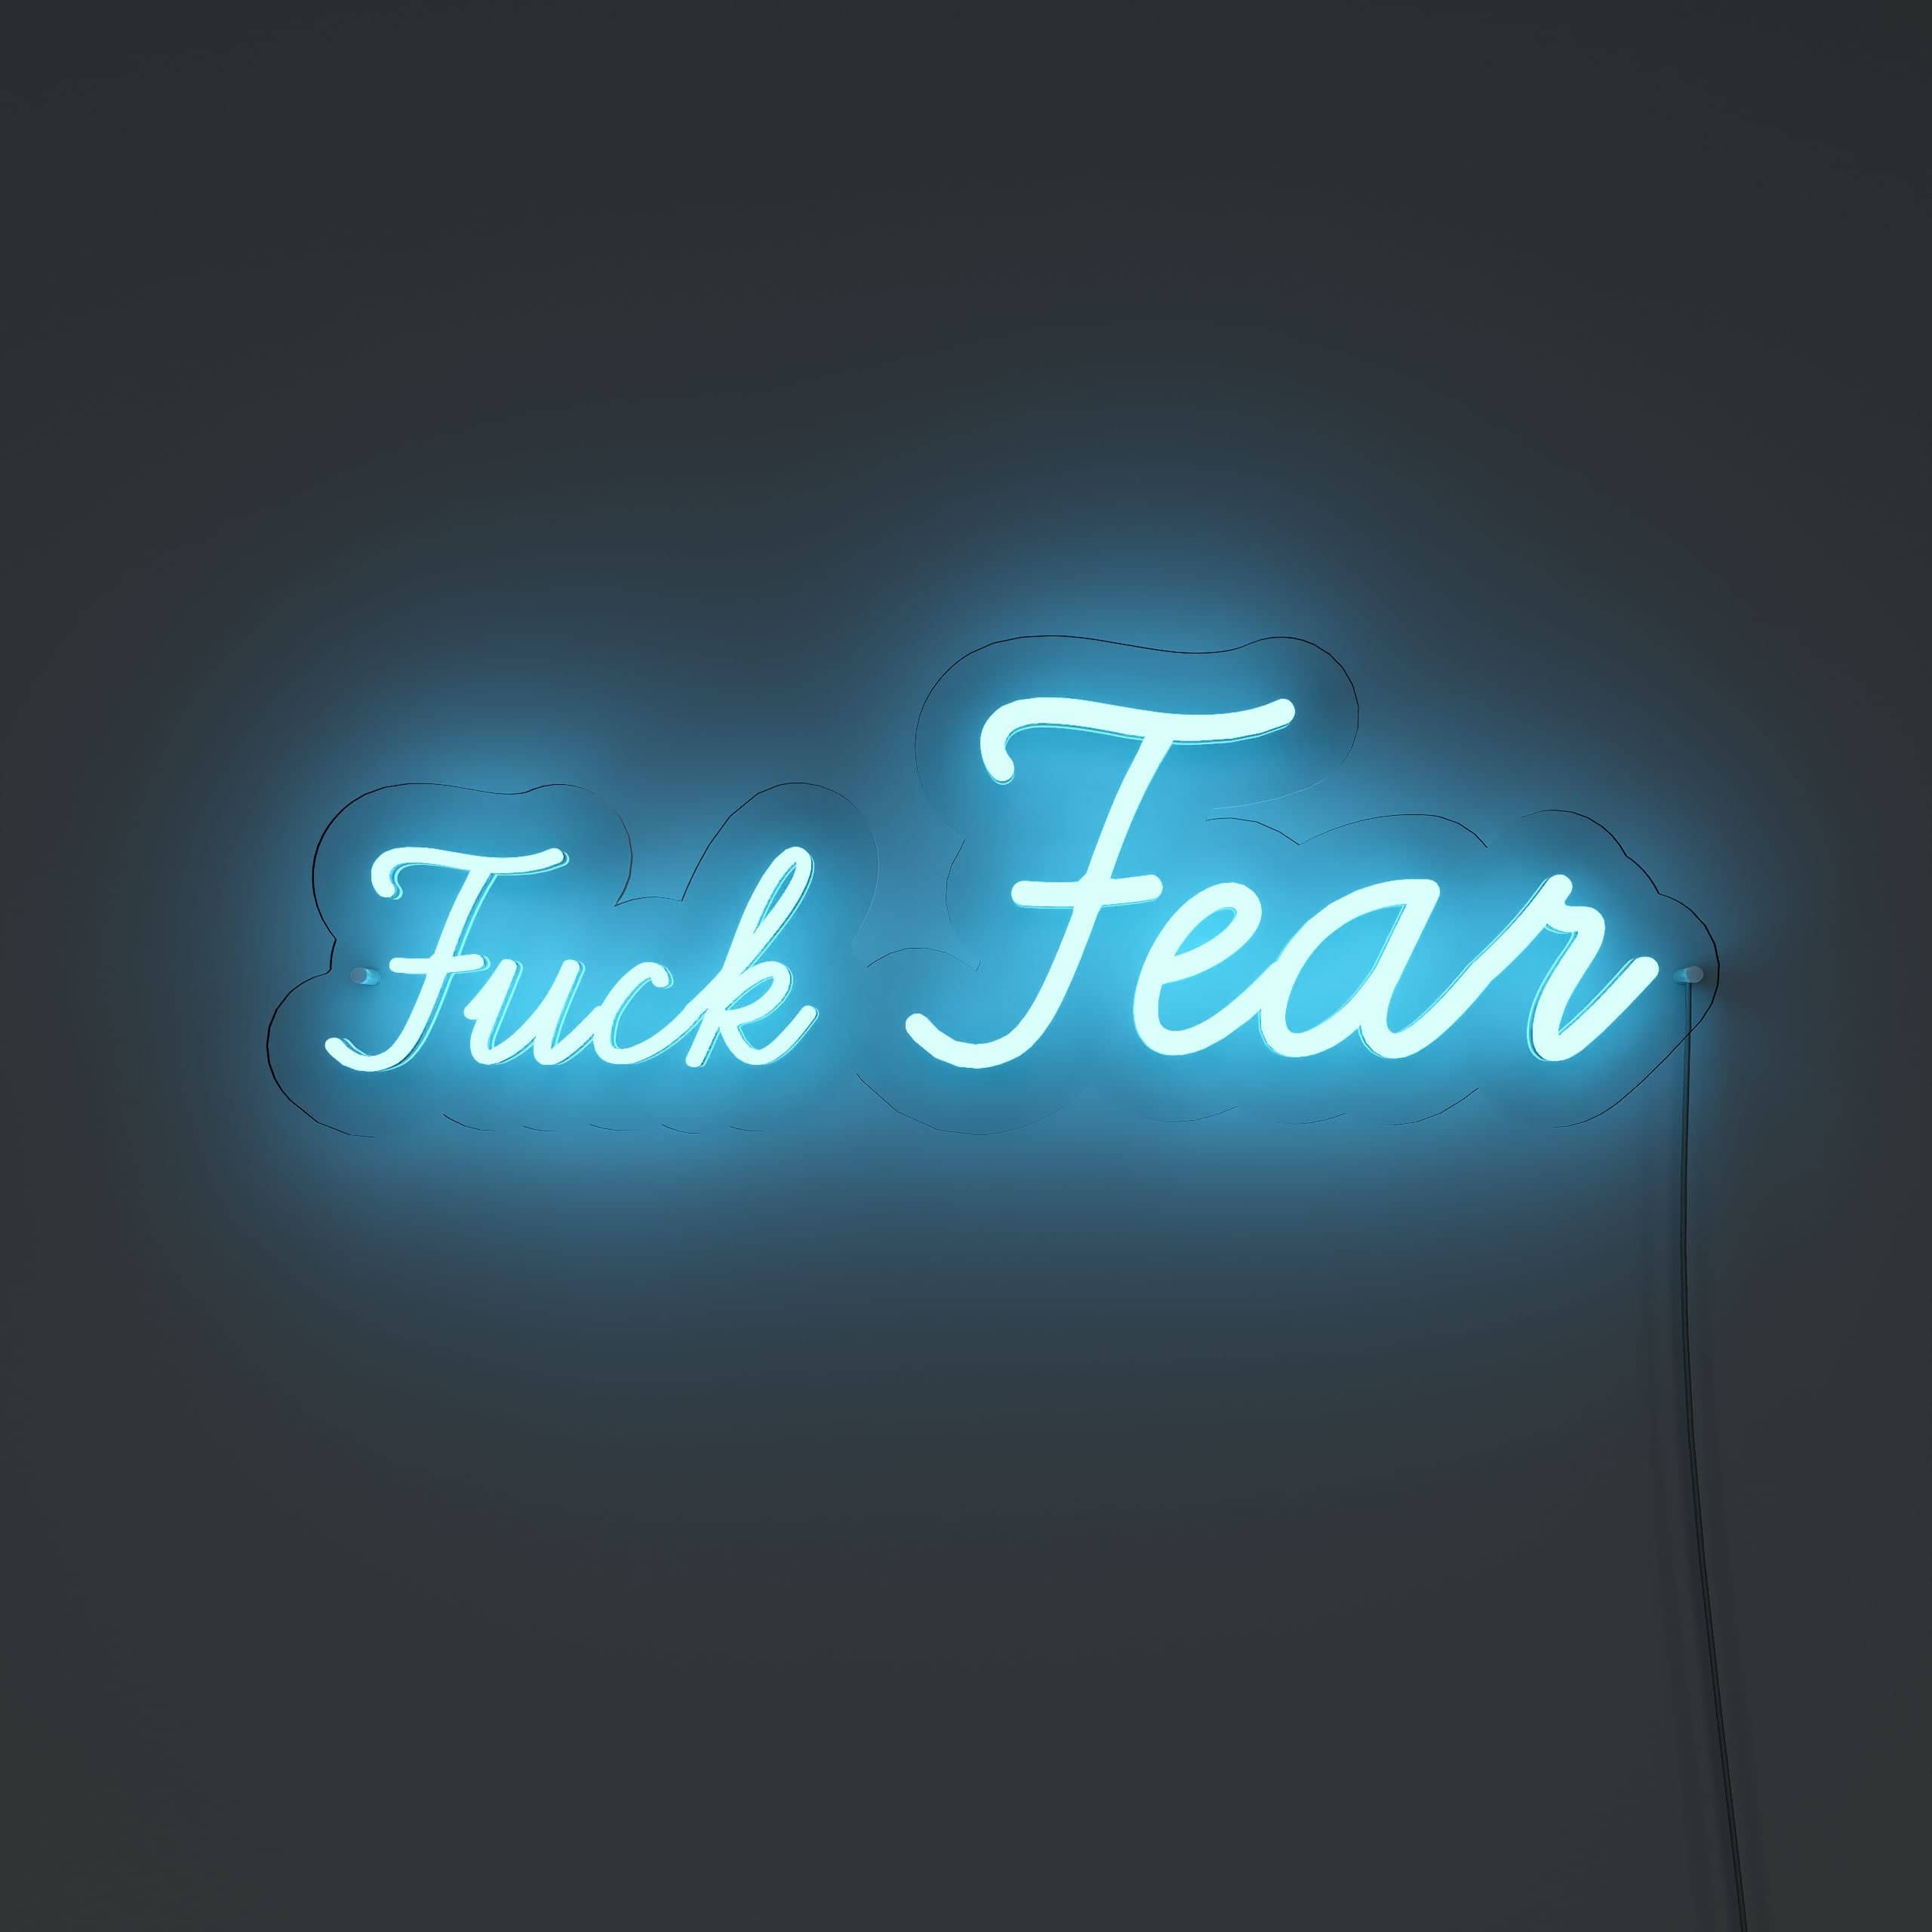 show-fear-who's-boss-neon-sign-lite